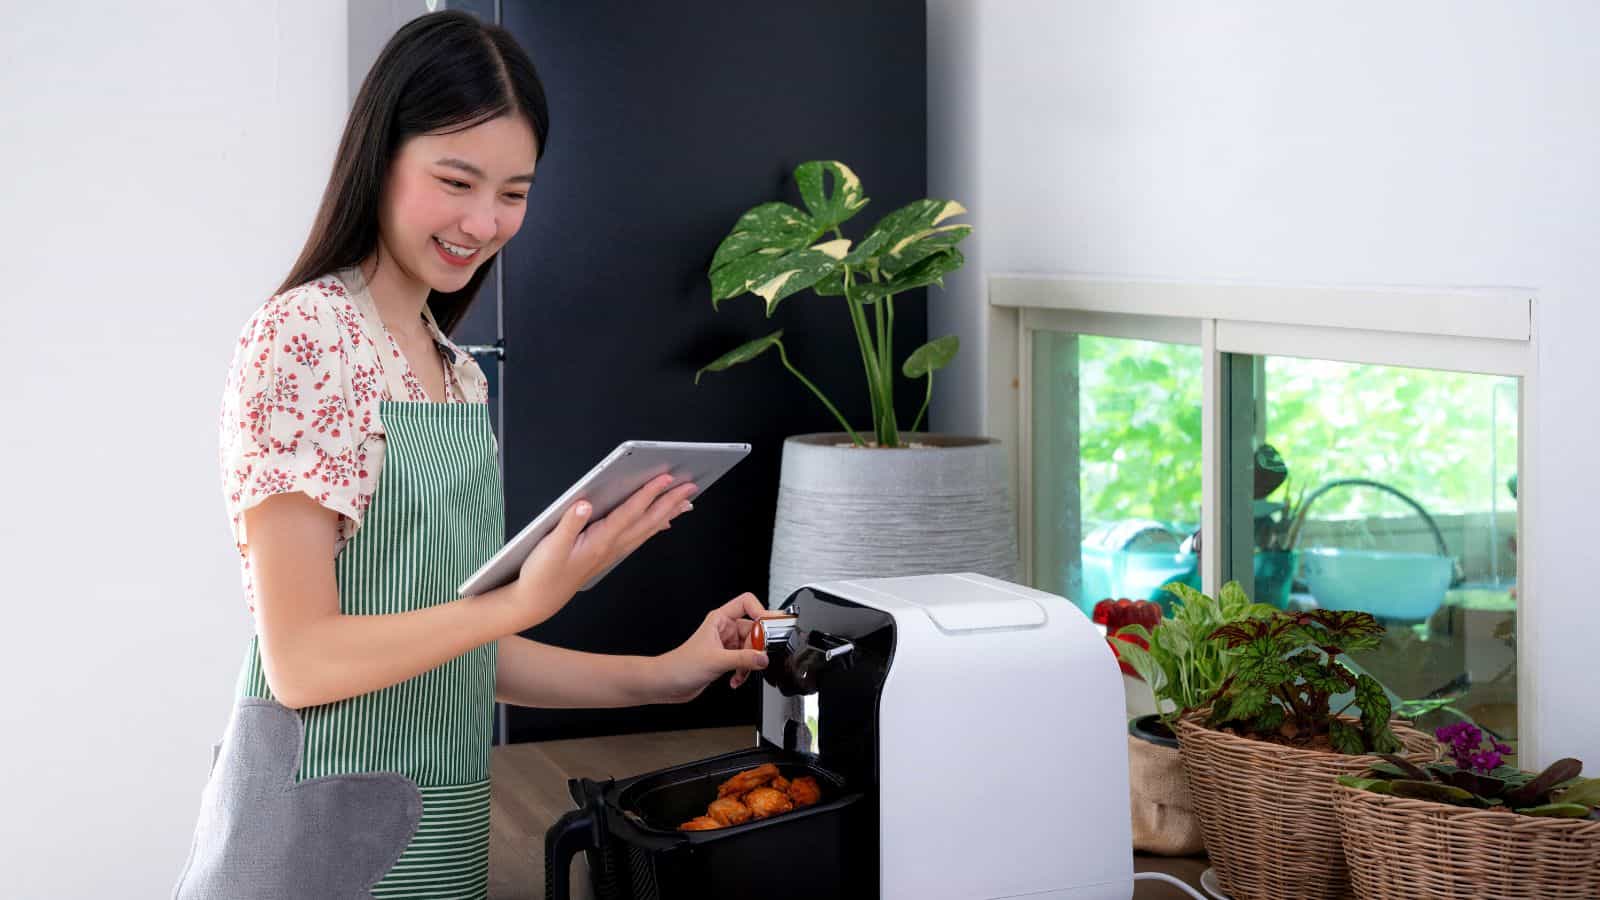 Woman setting temperature on air fryer.
